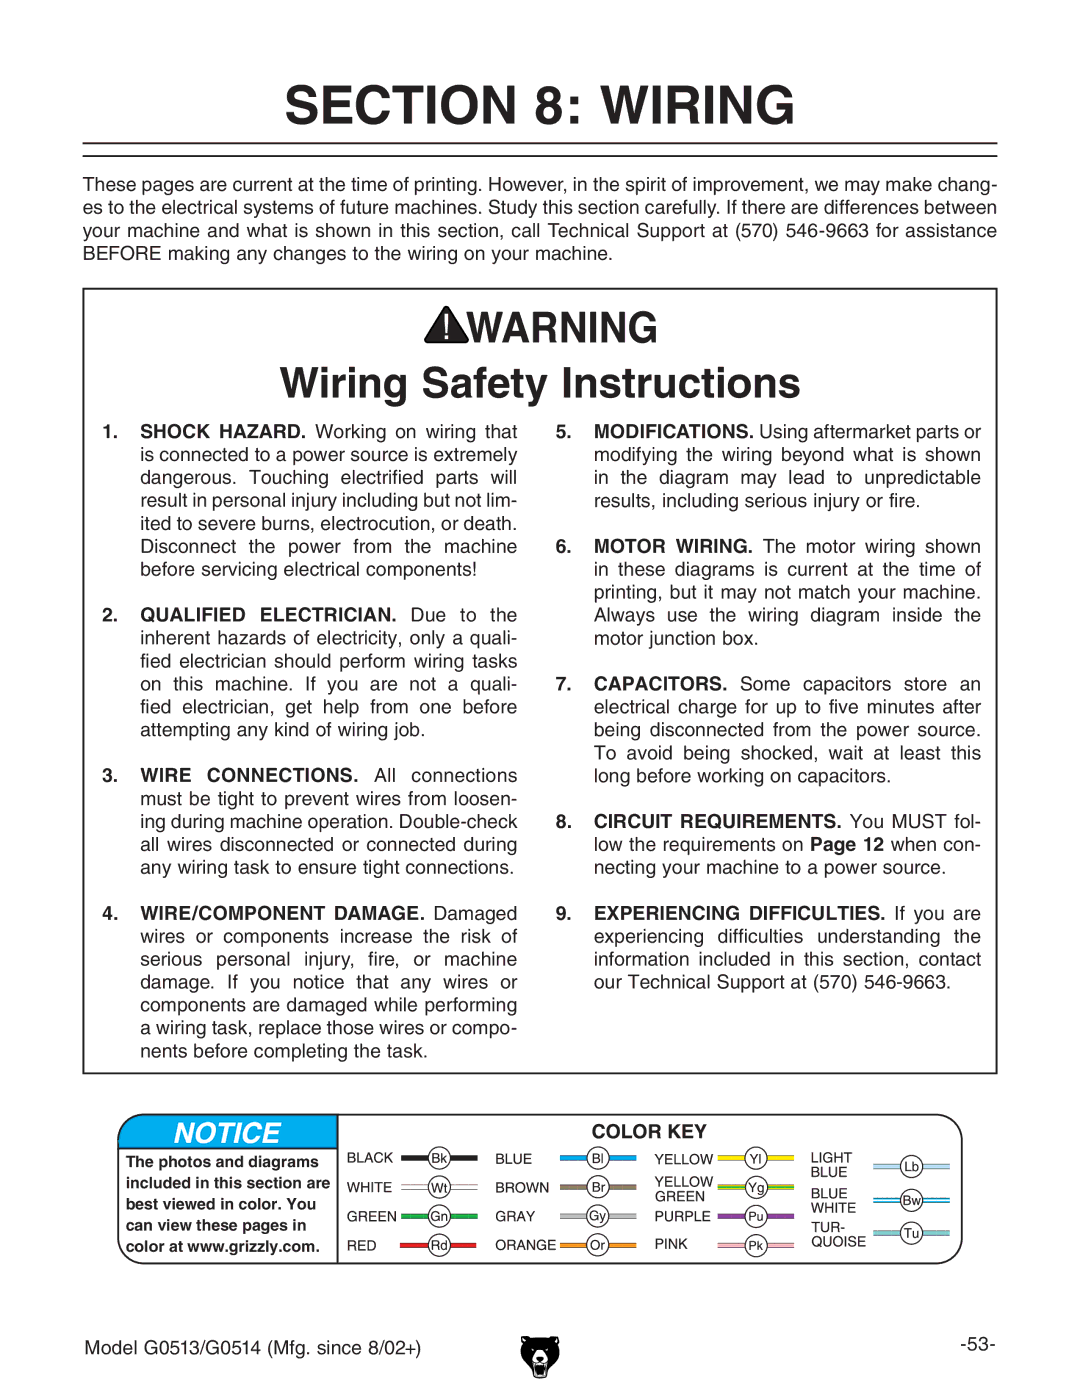 Grizzly G0514 owner manual Wiring Safety Instructions 